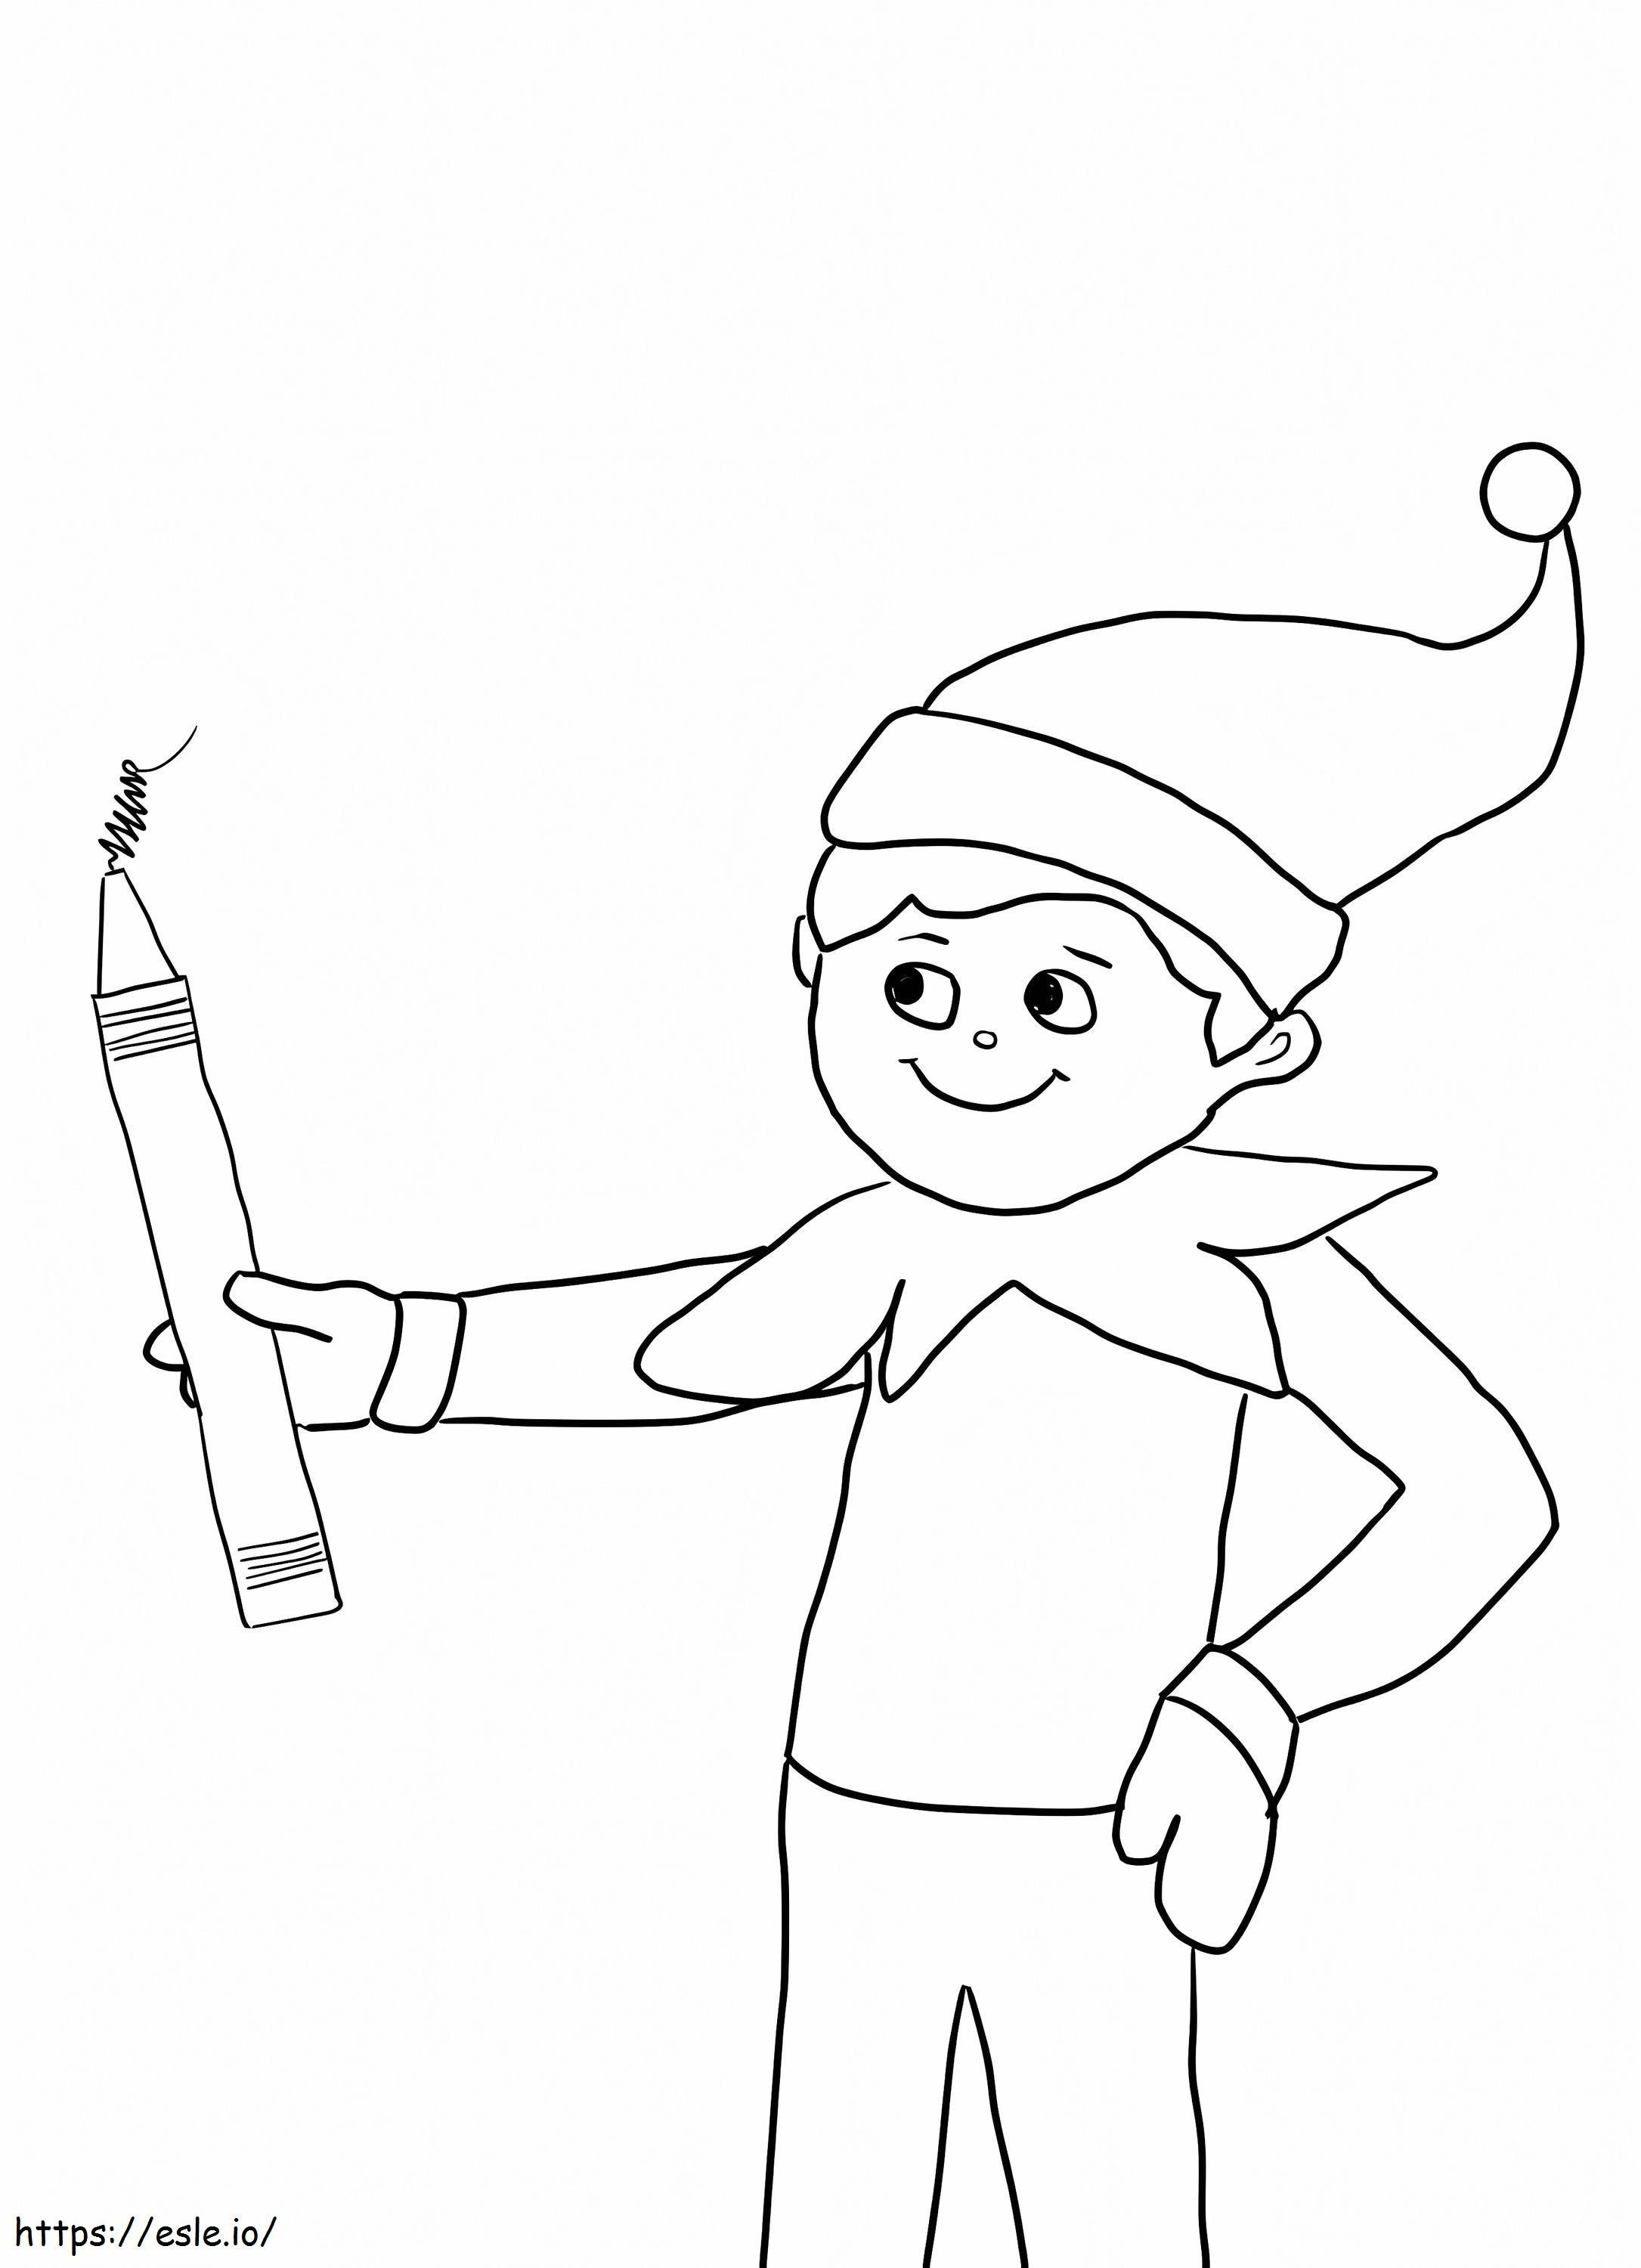 Elf On The Shelf With Pencil coloring page